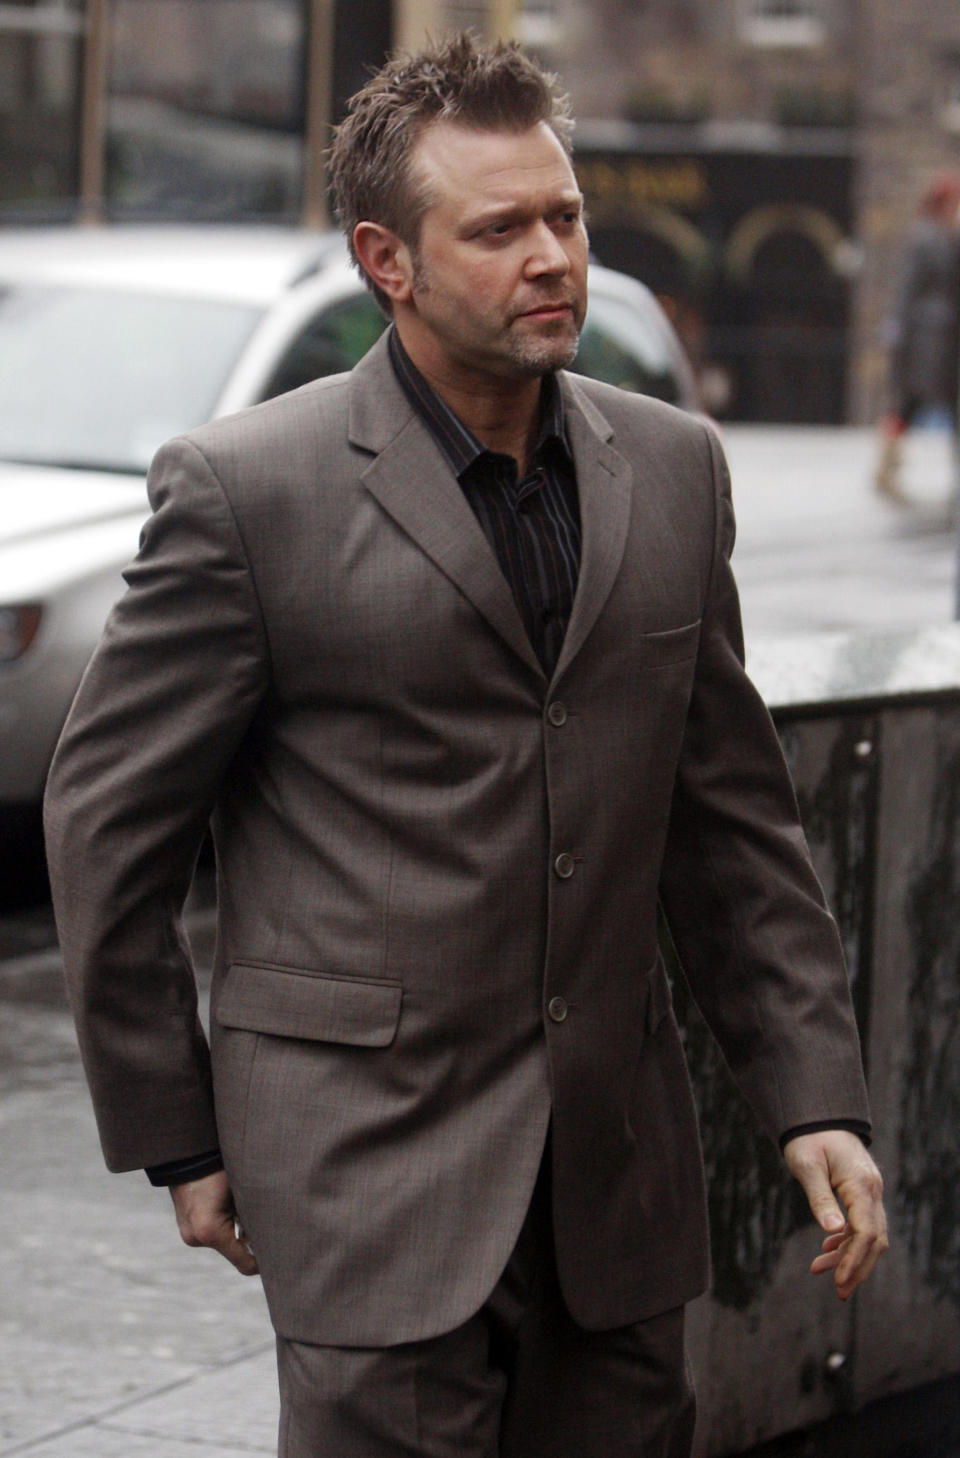 Darren Day arrives at Edinburgh Sheriff Court for a preliminary hearing after he was charged with drink-driving.